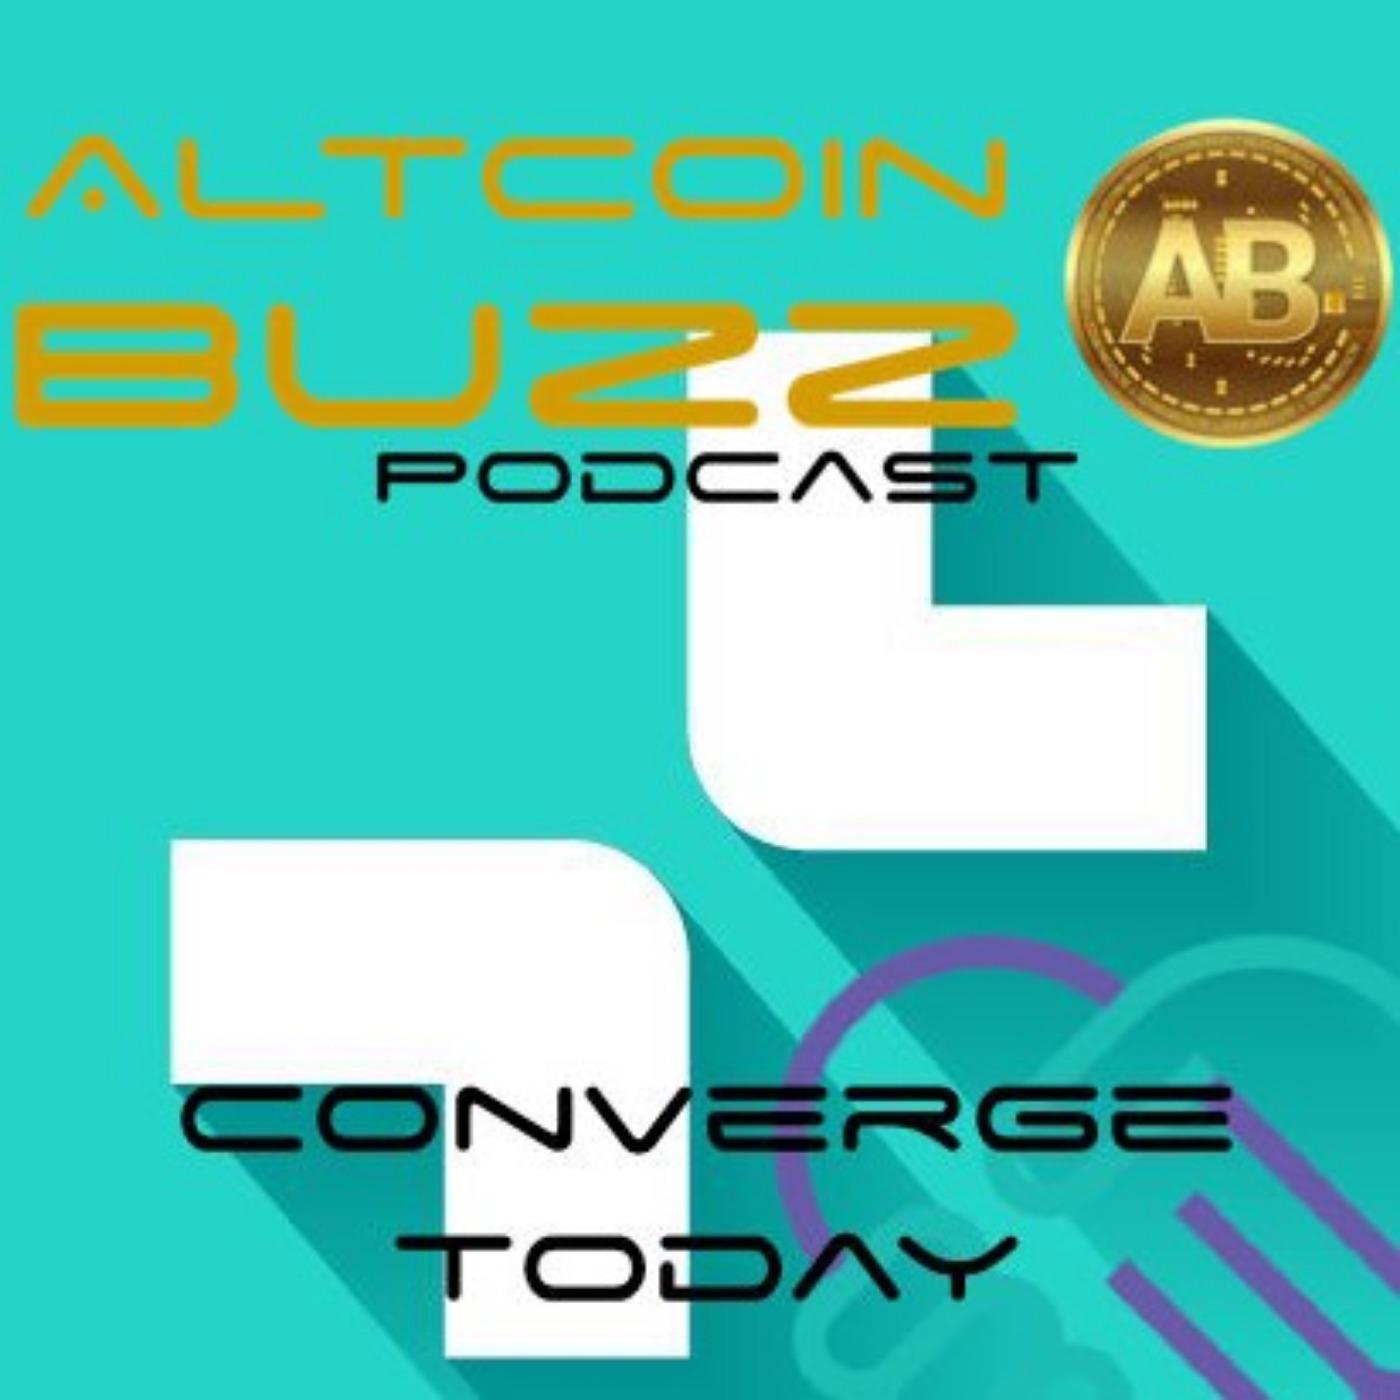 Interview with Converge Today Founder, James Tennant - Altcoin Buzz Crypto Podcast EP. 19